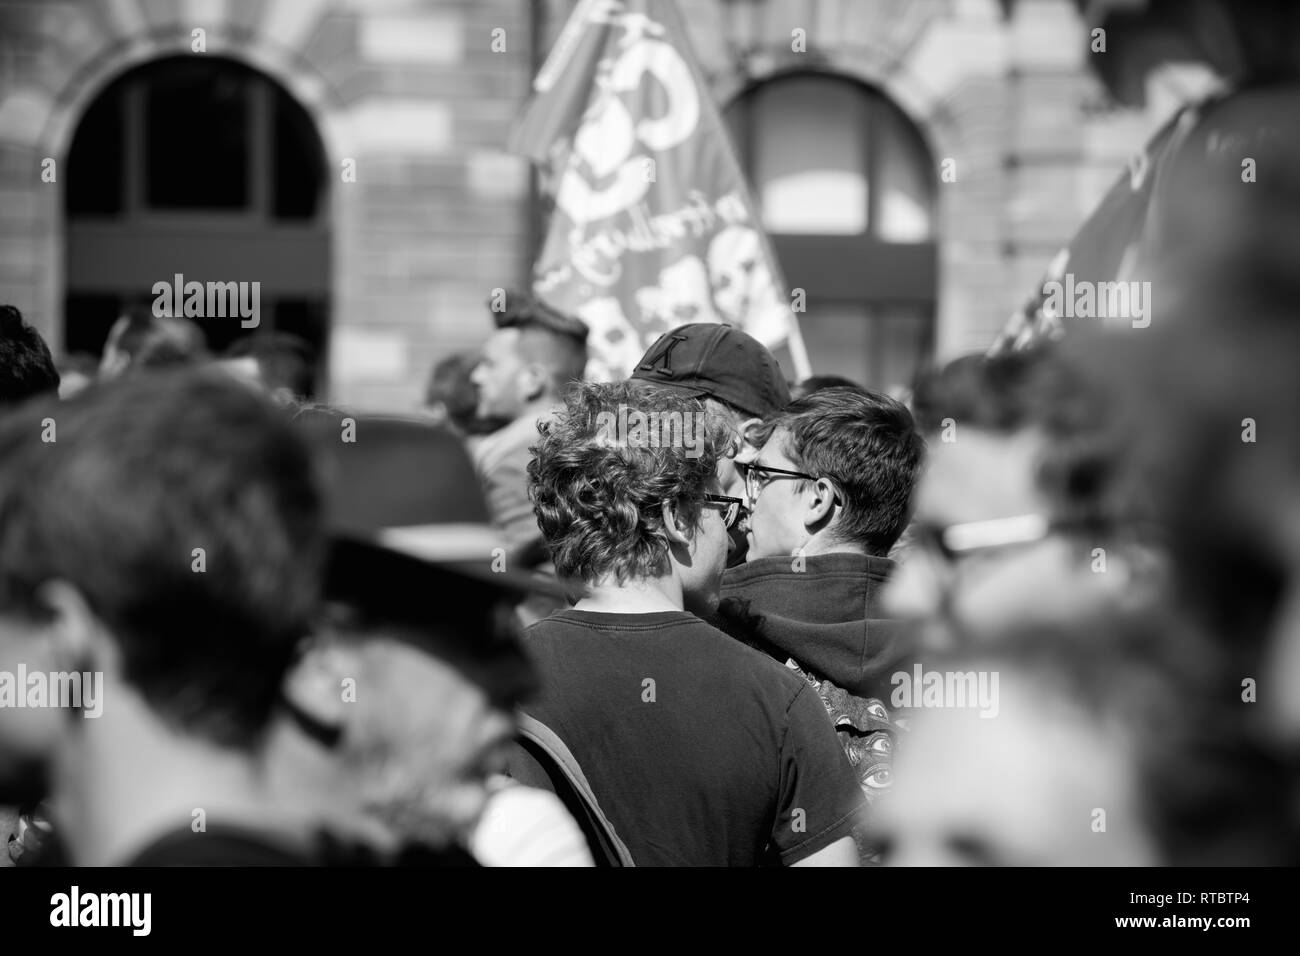 STRASBOURG, FRANCE - SEPT 12, 2017: Black and white demonstrators walk at political march during a French Nationwide day of protest against the labor reform proposed by Emmanuel Macron Government Stock Photo